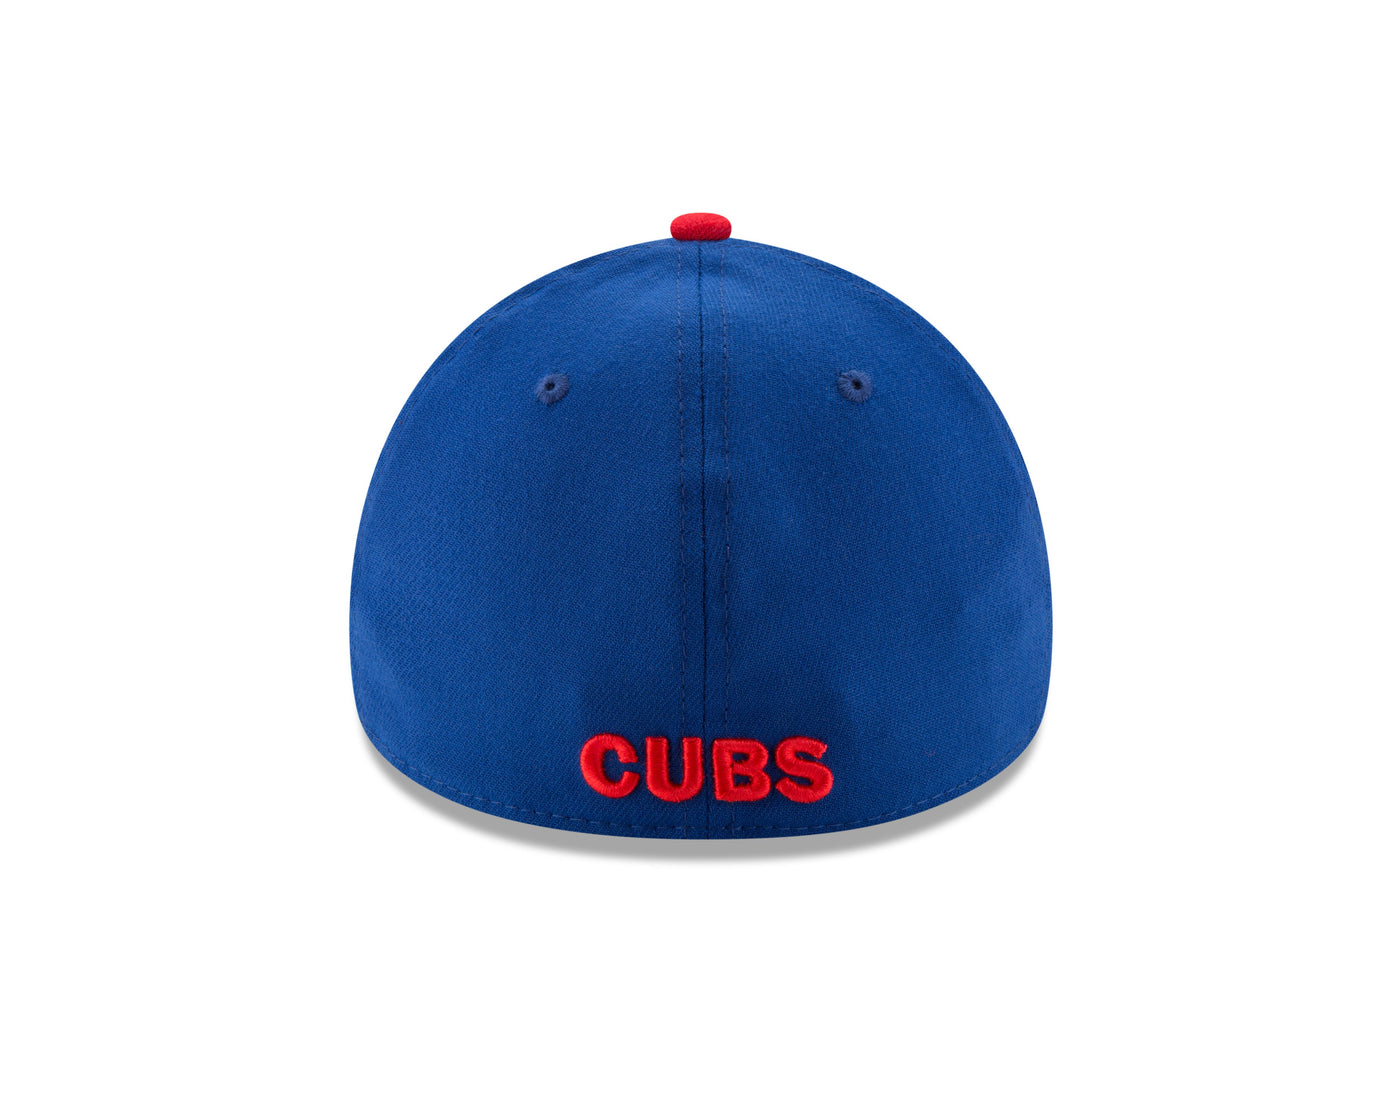 CHICAGO CUBS 9/11 REMEMBRANCE 39THIRTY CAP - Ivy Shop